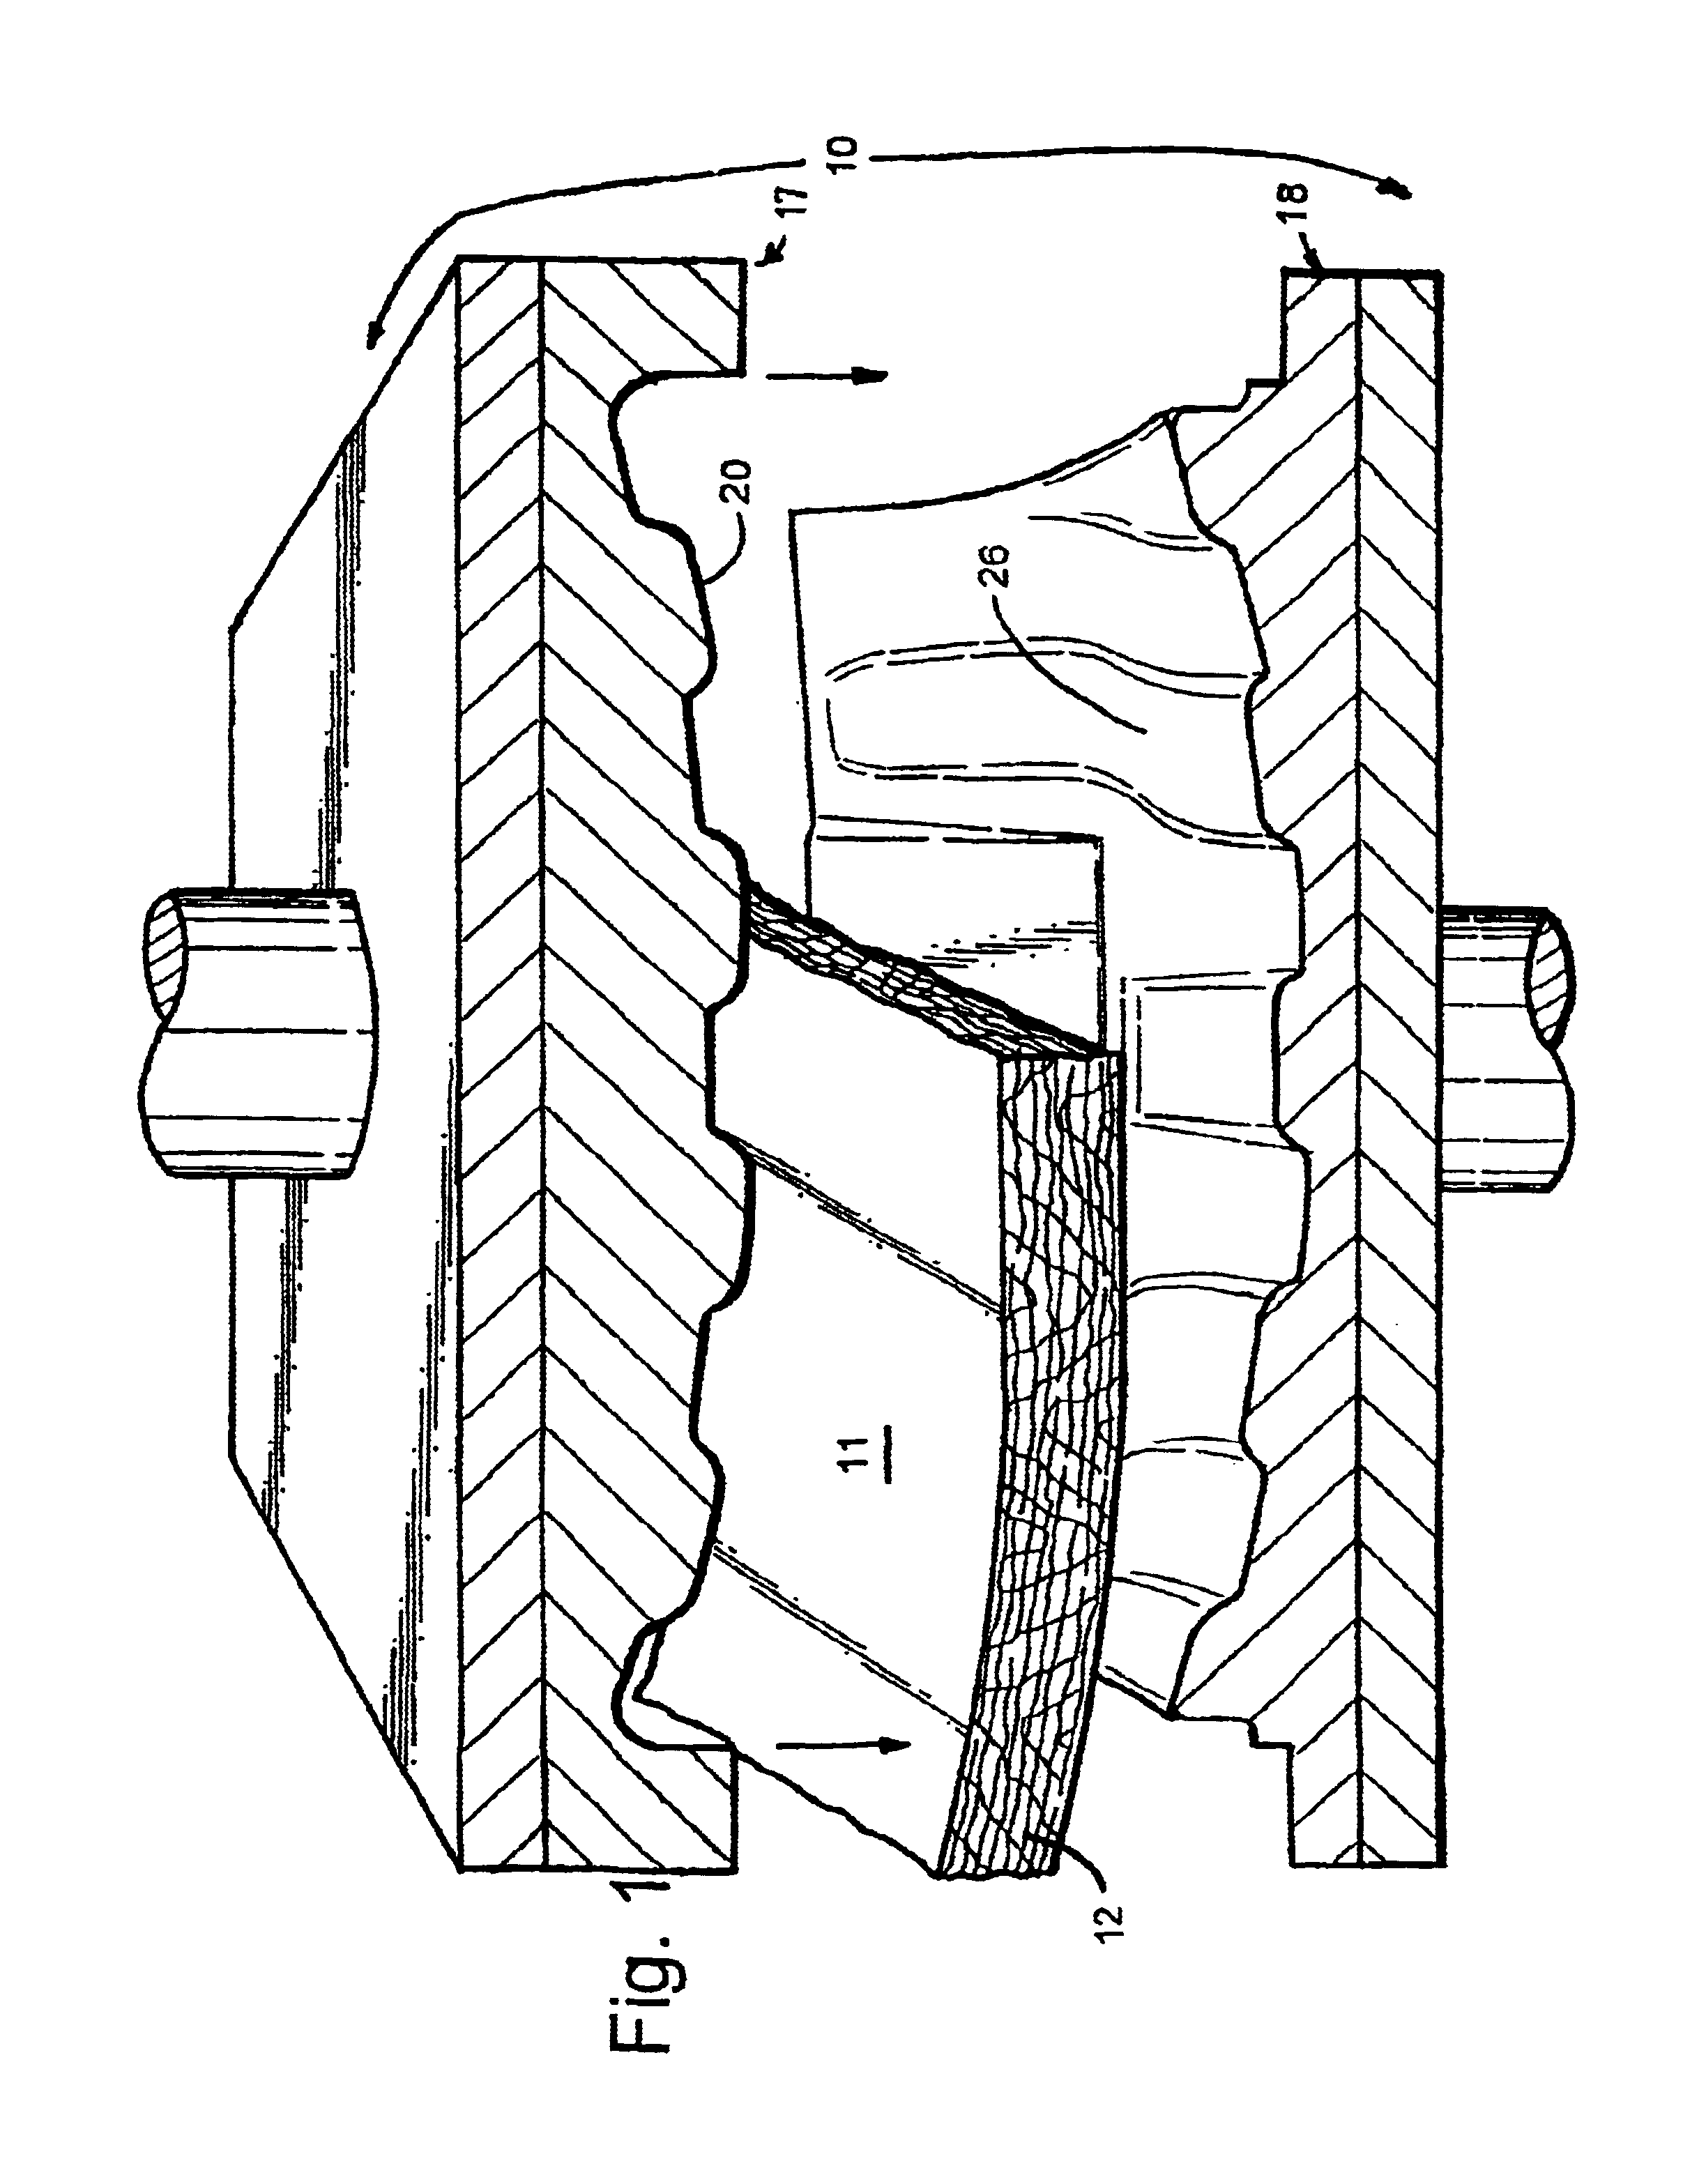 Wood strand molded parts having three-dimensionally curved or bent channels, and method for making same